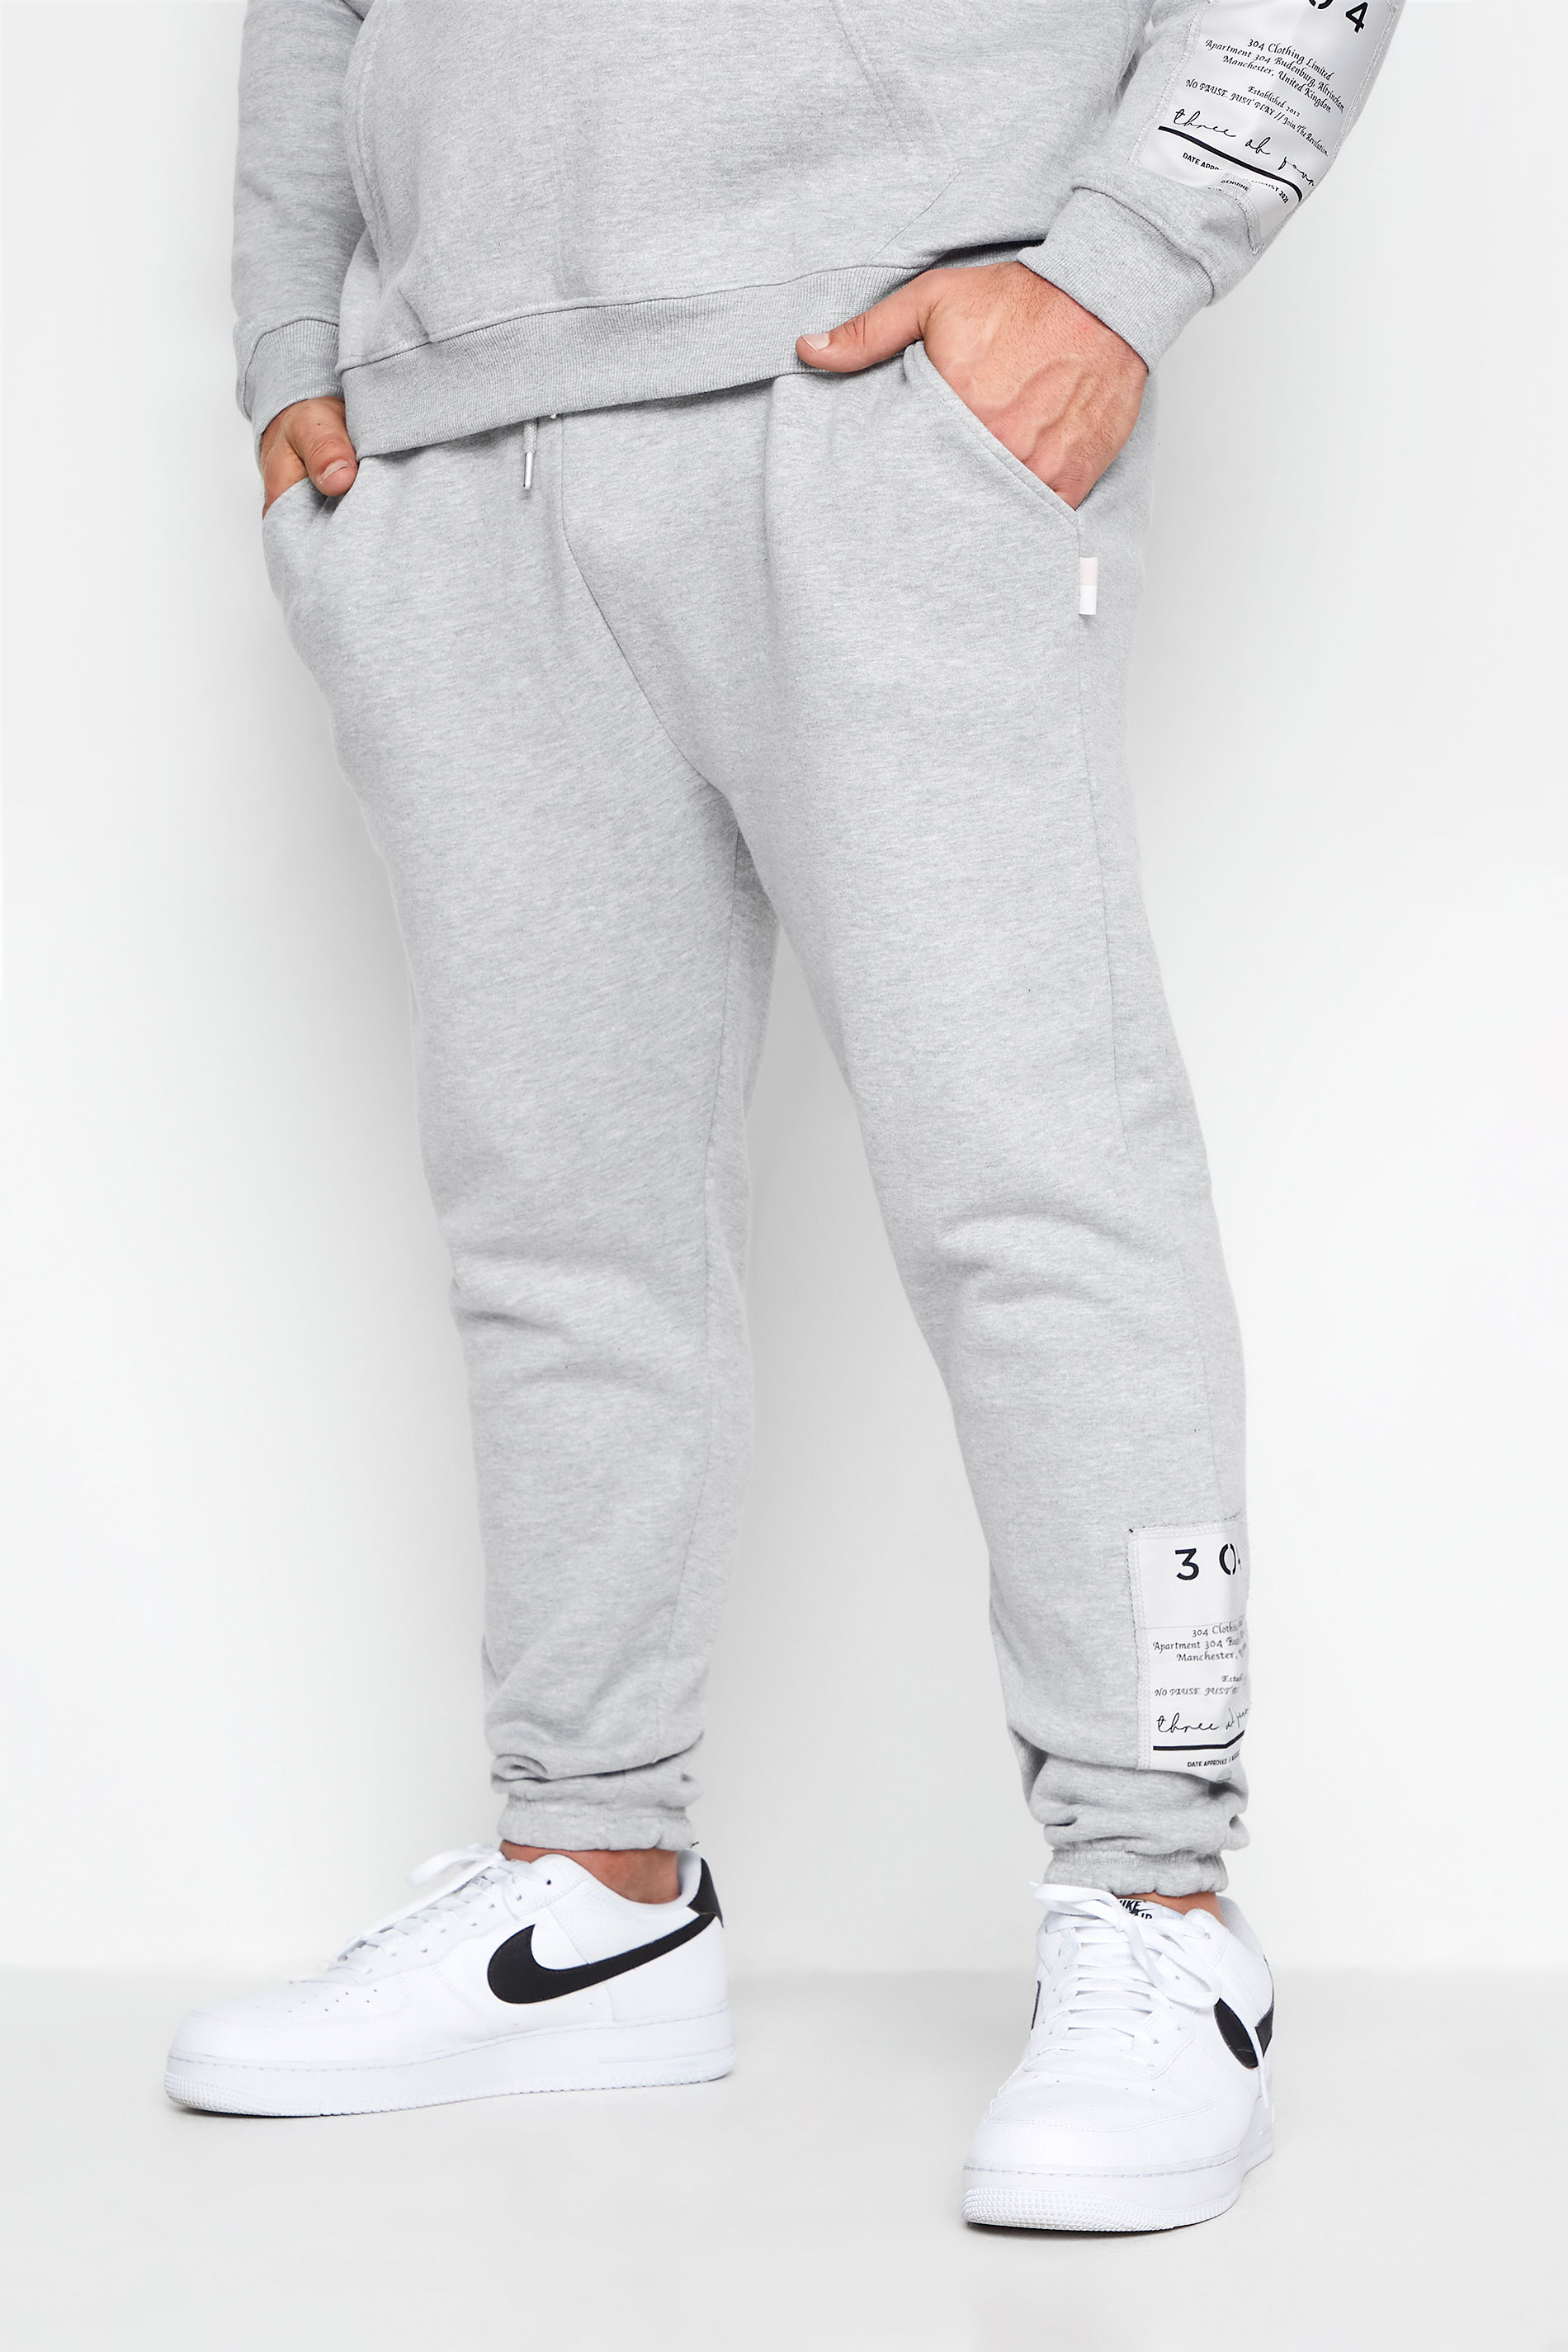 304 CLOTHING Grey Patch Joggers_A.jpg